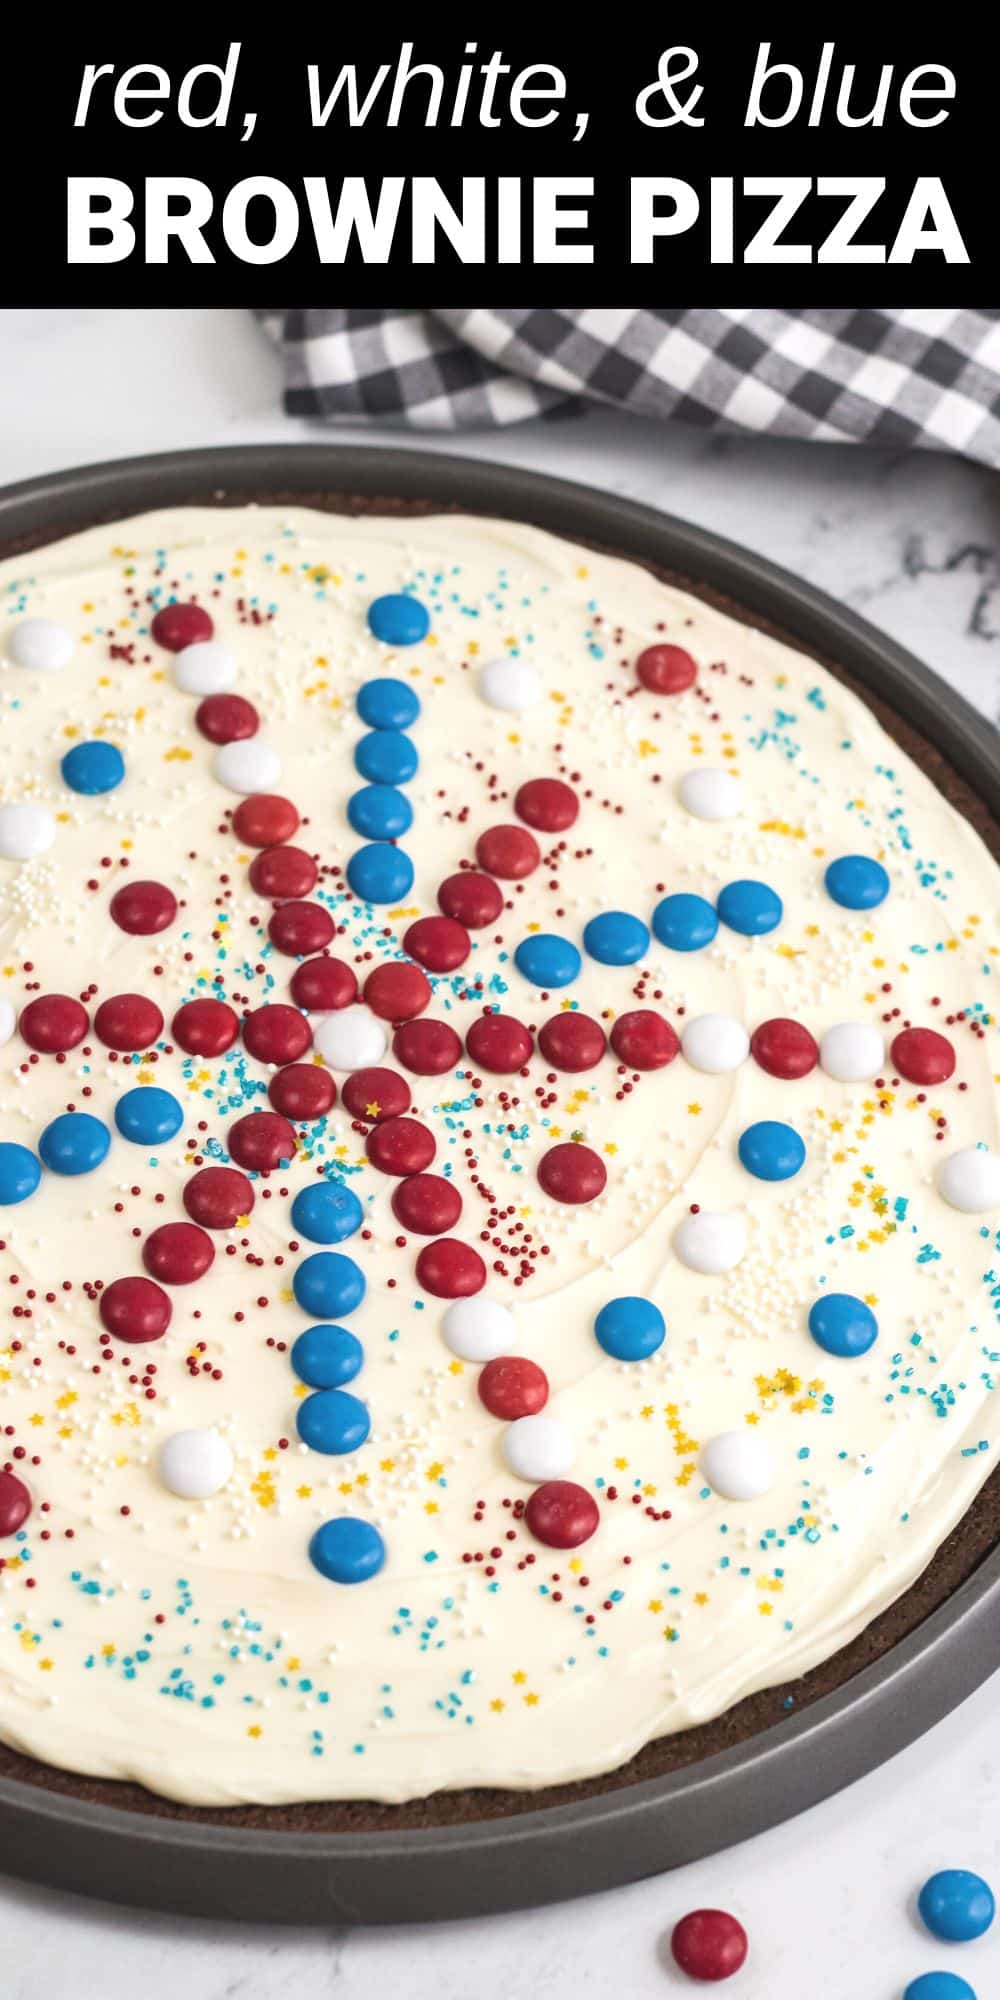 Fourth of July brownie pizza is the perfect patriotic treat for any Independence Day celebration. This giant brownie shaped and decorated like a pizza is a fun and creative way to enjoy a classic party dessert.